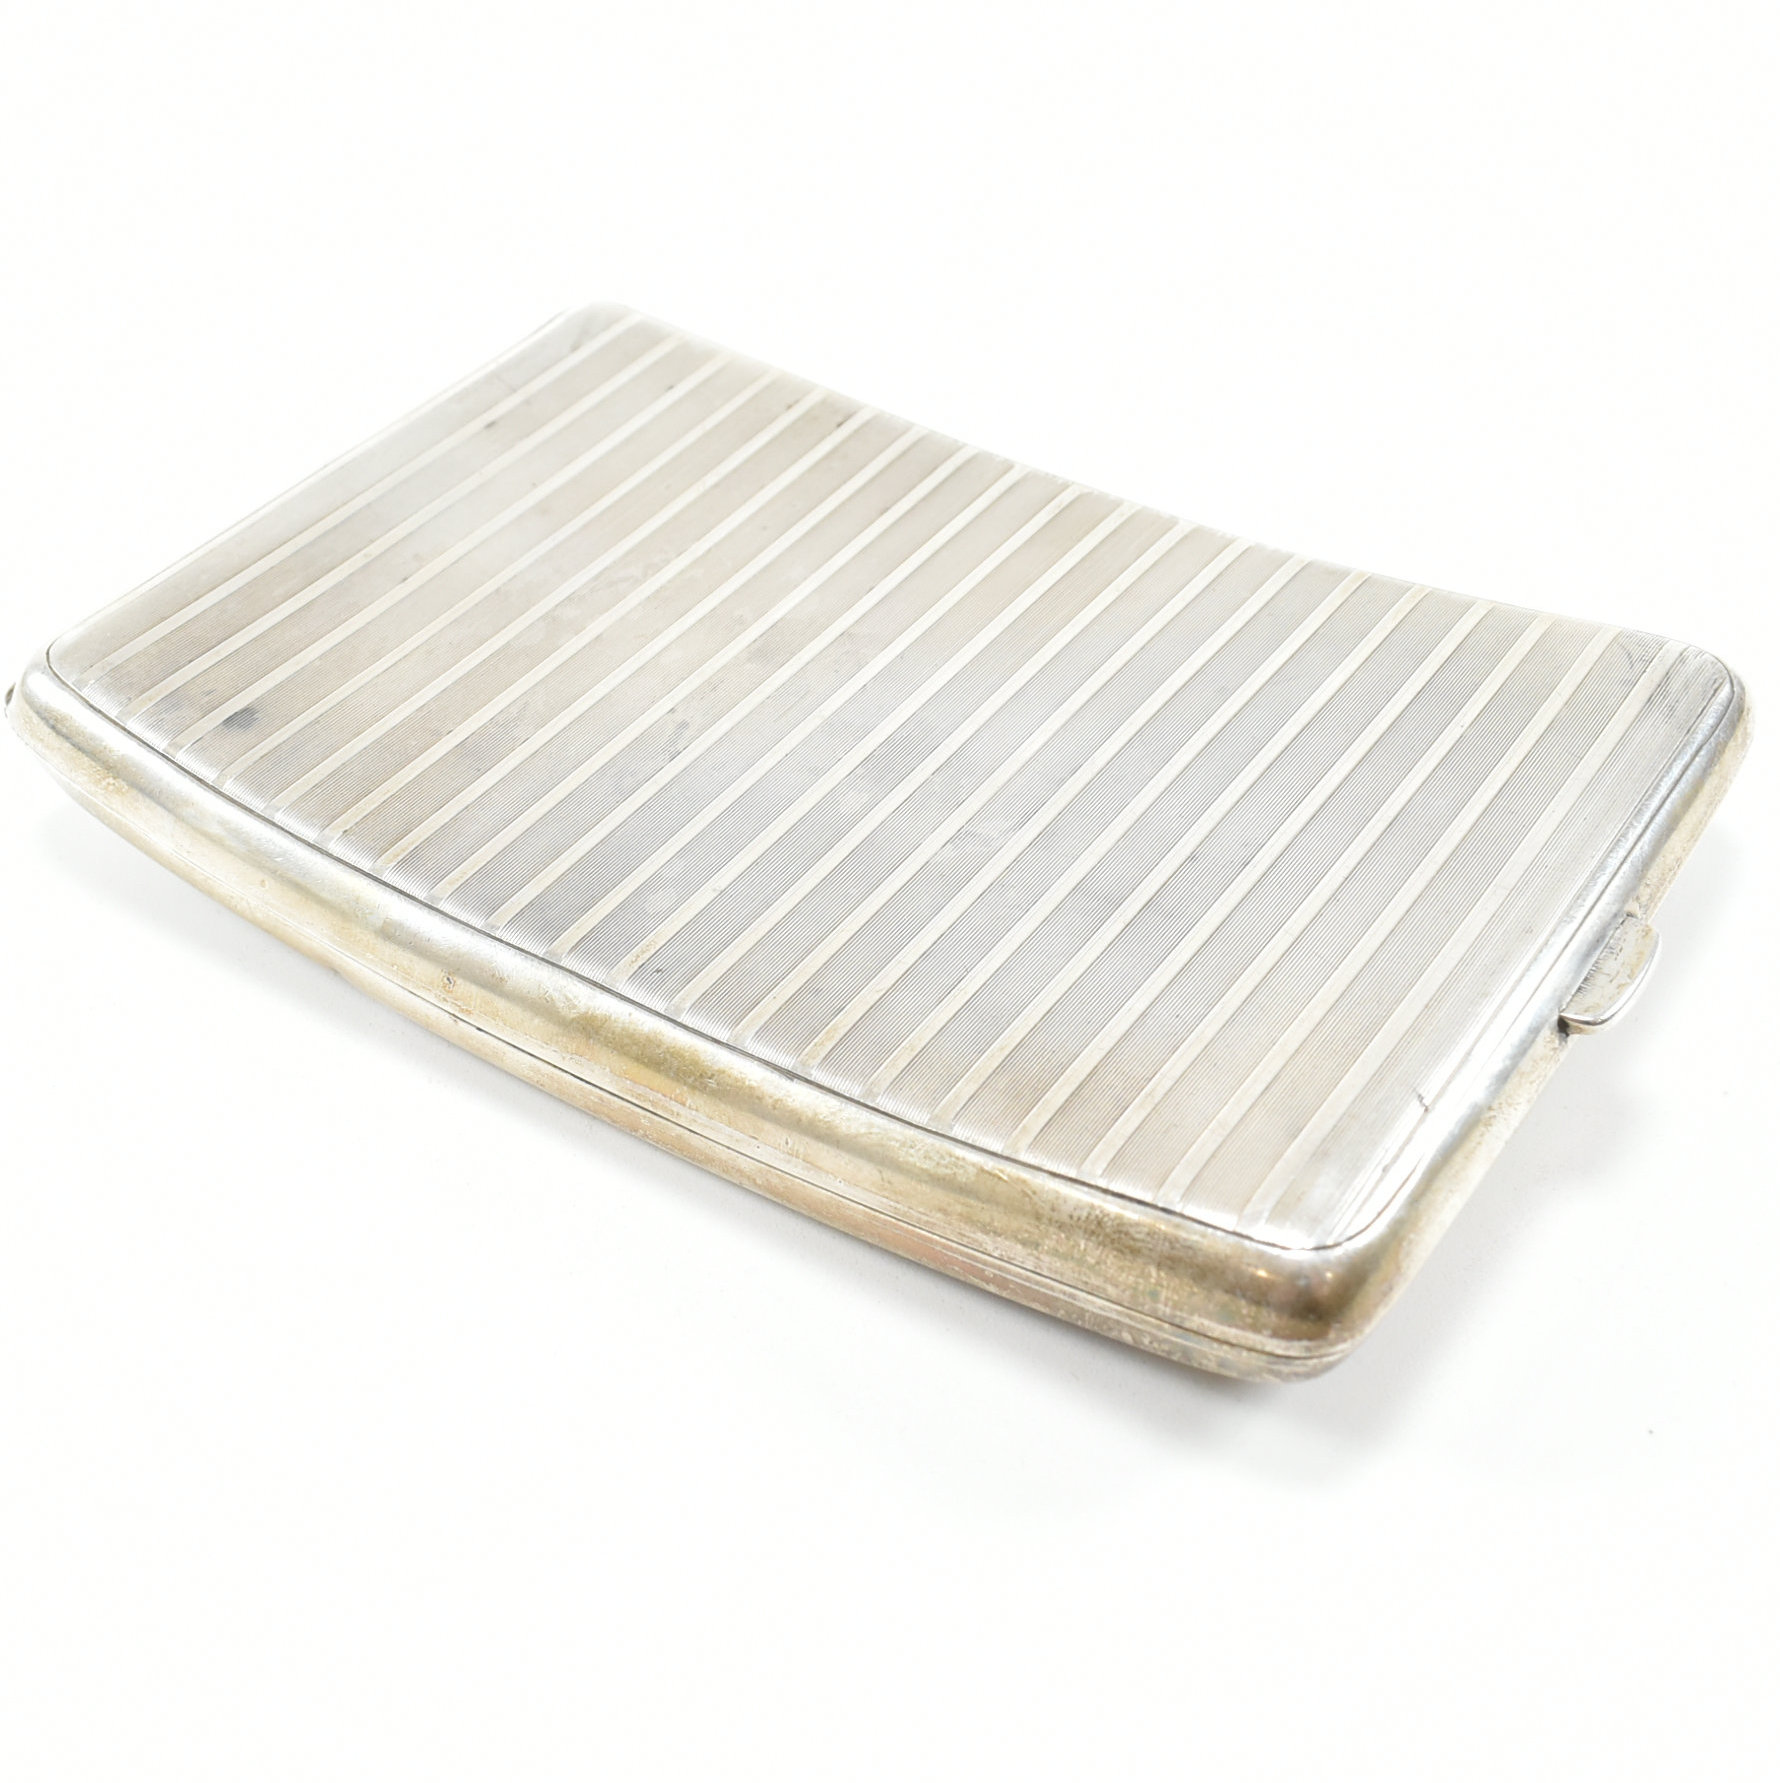 EARLY 20TH CENTURY HALLMARKED SILVER MAPPIN & WEBB CIGARETTE CASE - Image 3 of 8